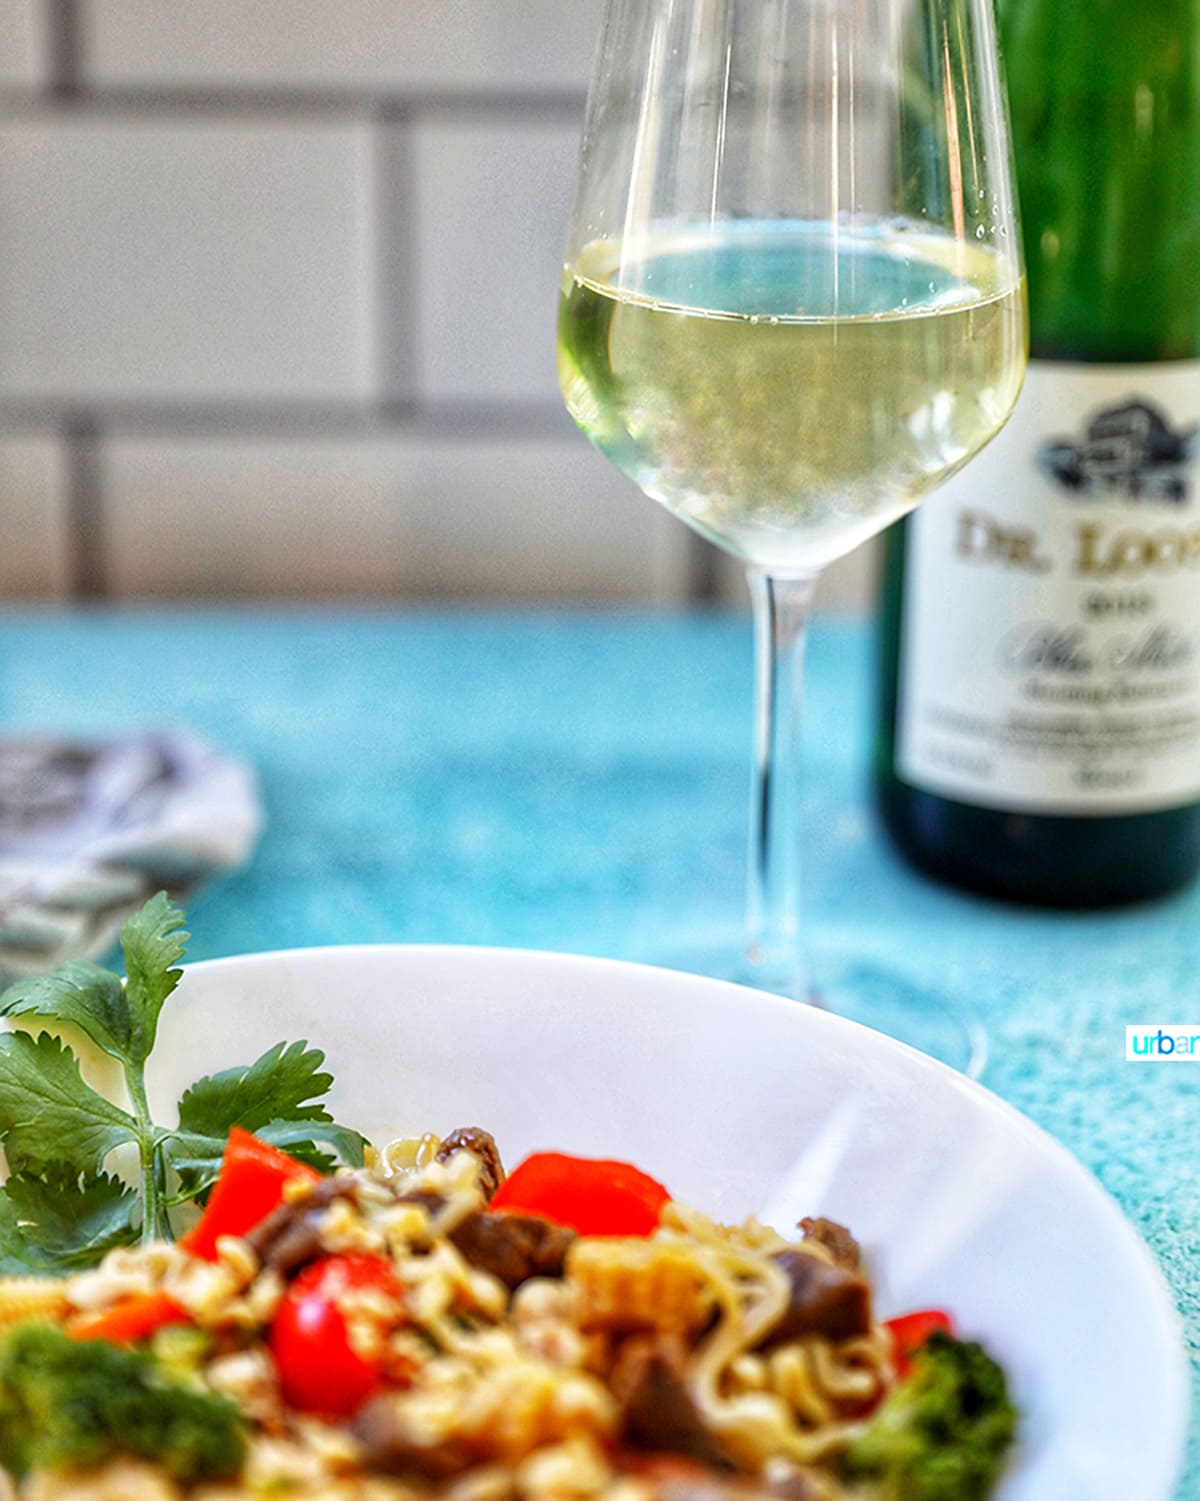 Dr Loosen riesling with beef lo mein